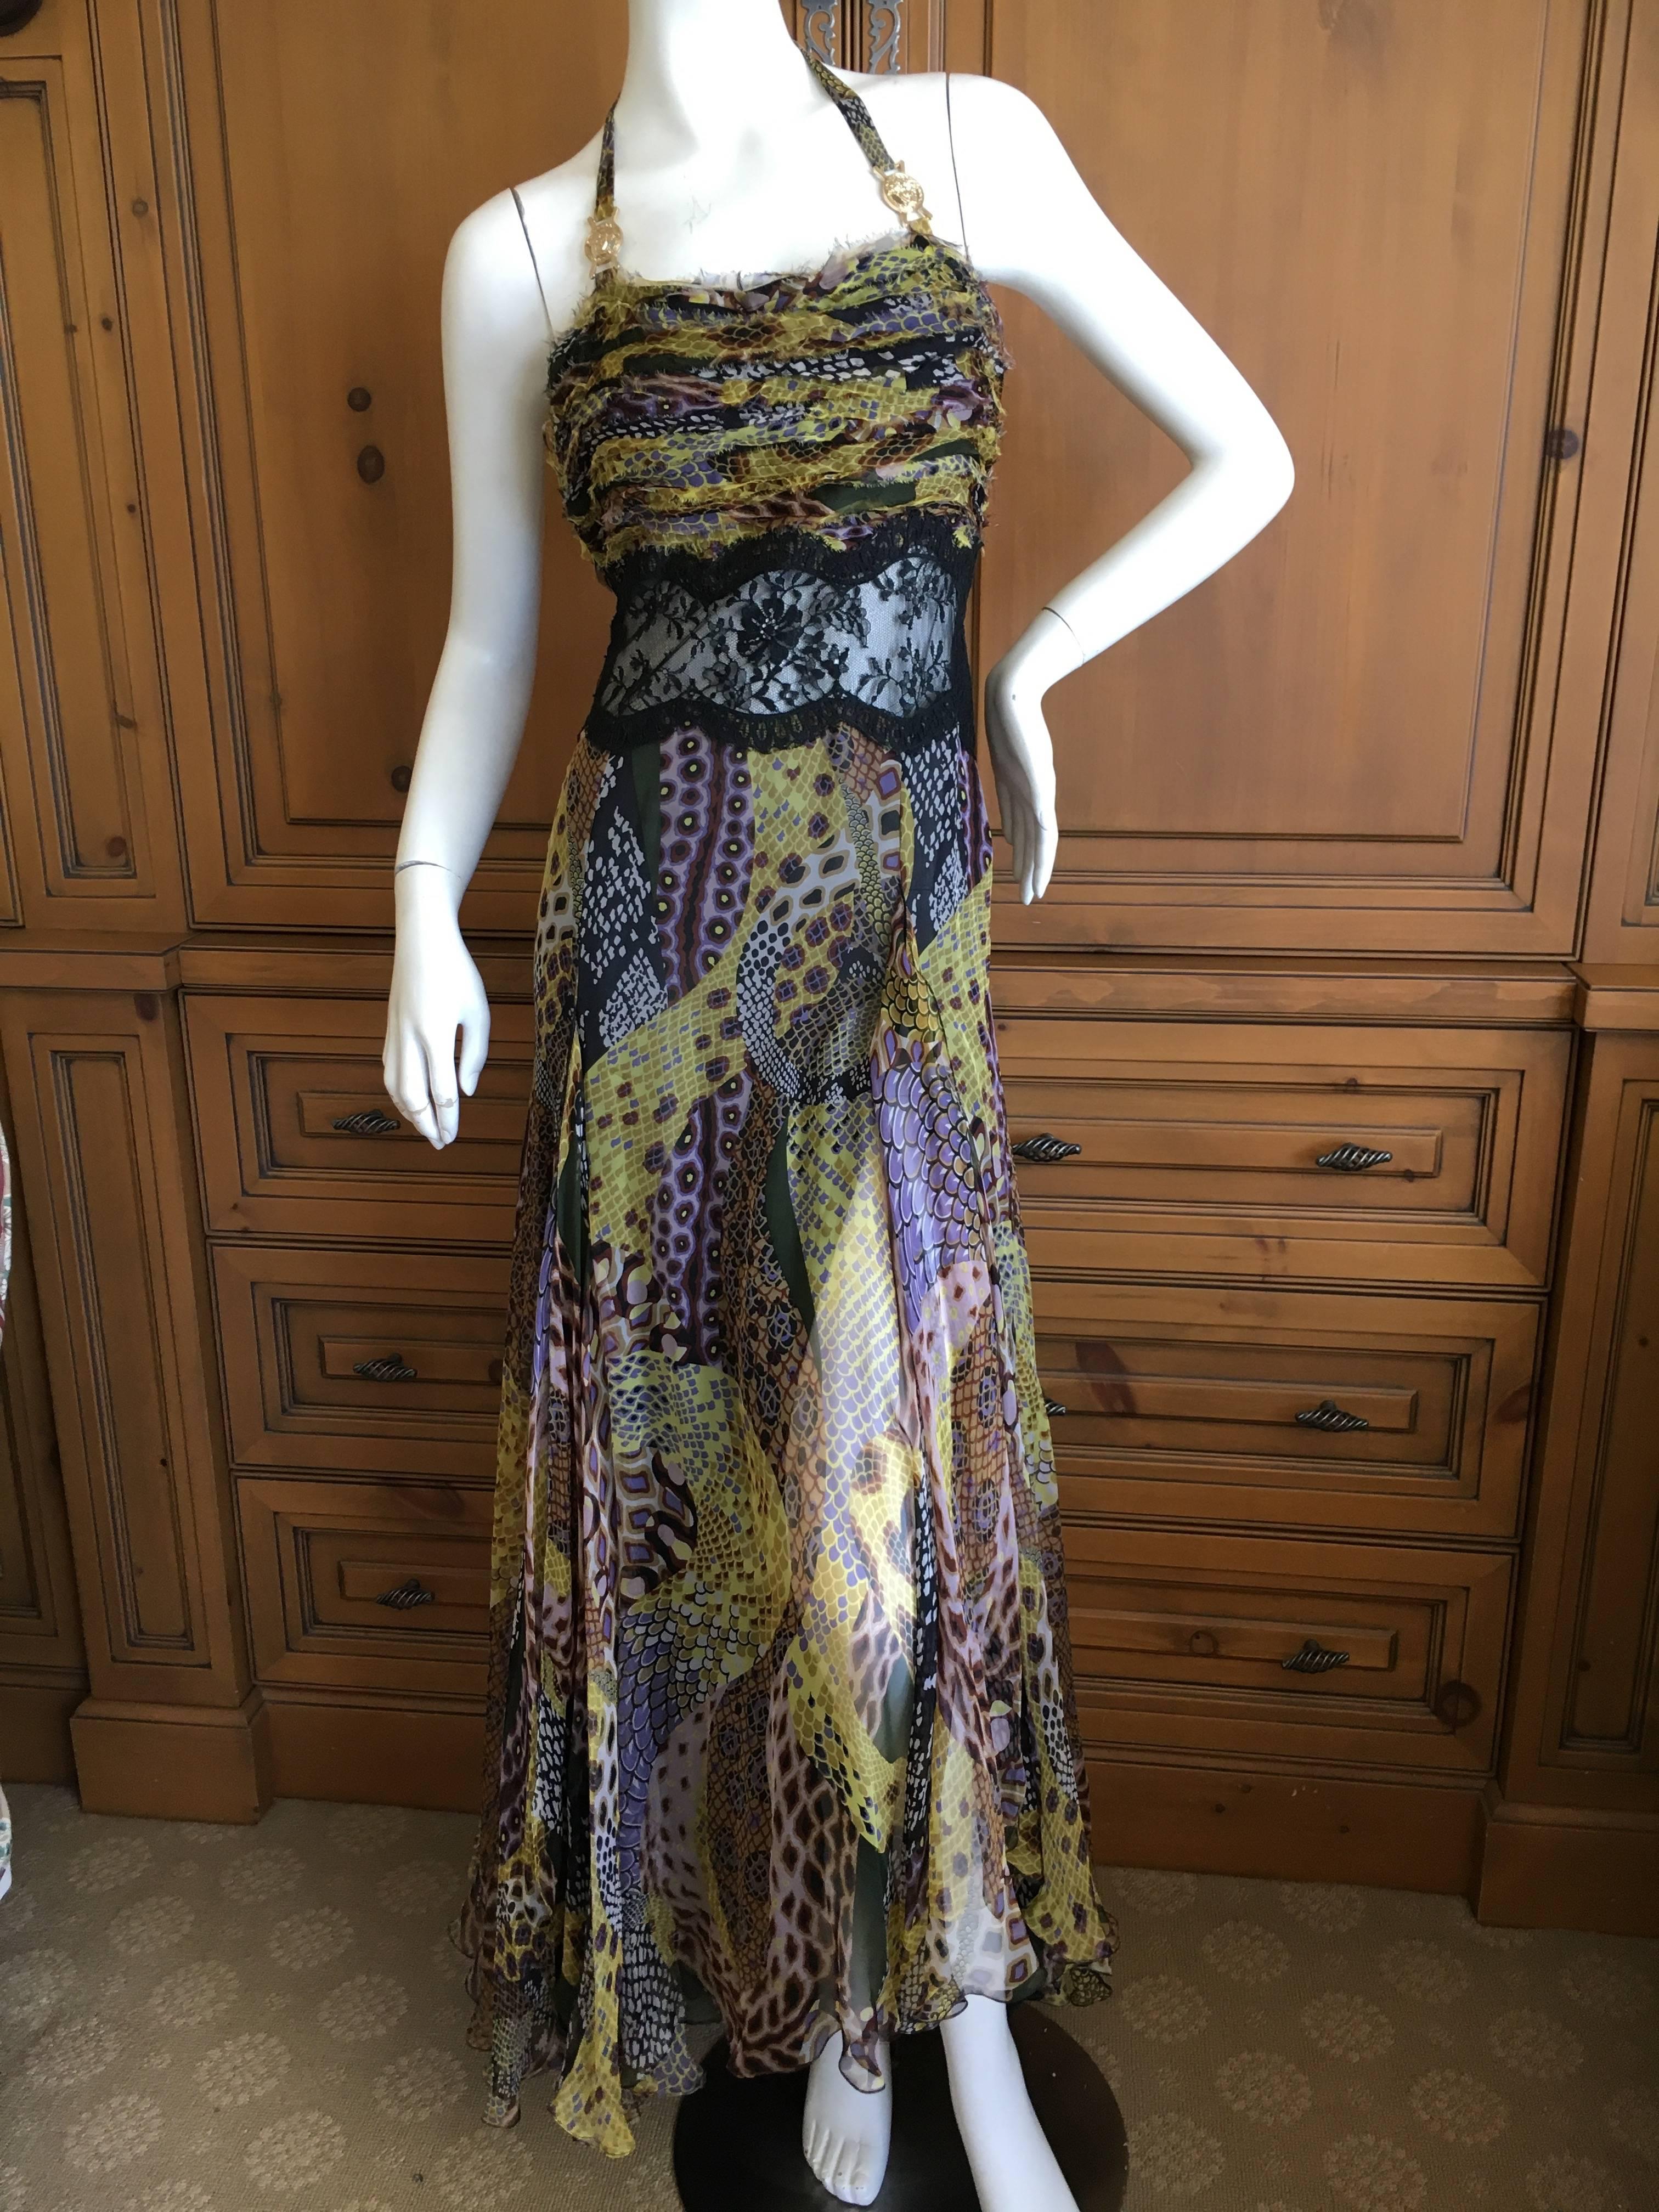 Versace Vintage 90's Snake Print Dress with Sheer Lace and Medusa Ornaments
Size  44
 Bust 36"
 Waist 29"
 Hips 42" 
Length 60" 
Excellent condition, there are some tiny blemishes in the fabric on the back near the bottom hem,